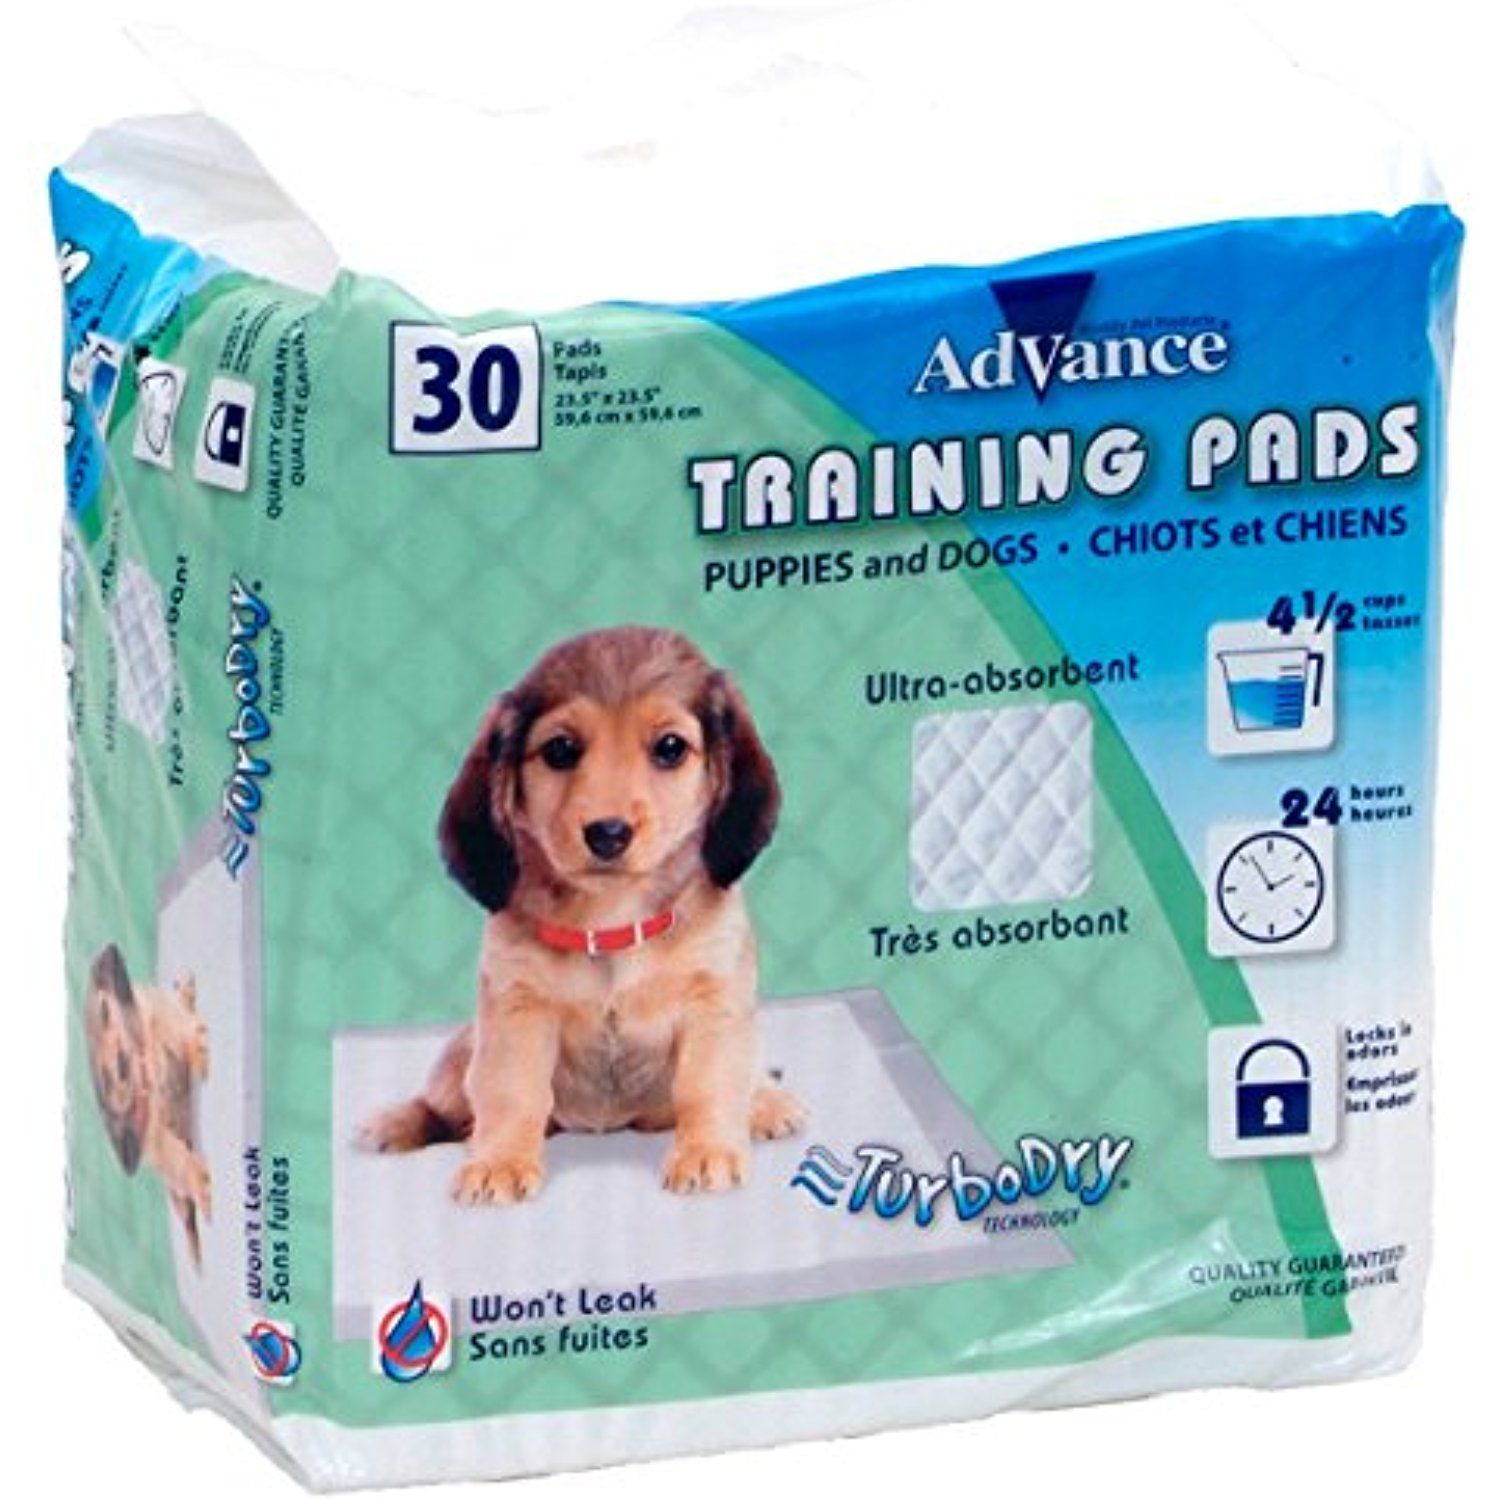 Advance Puppy Training Pads - 30 count